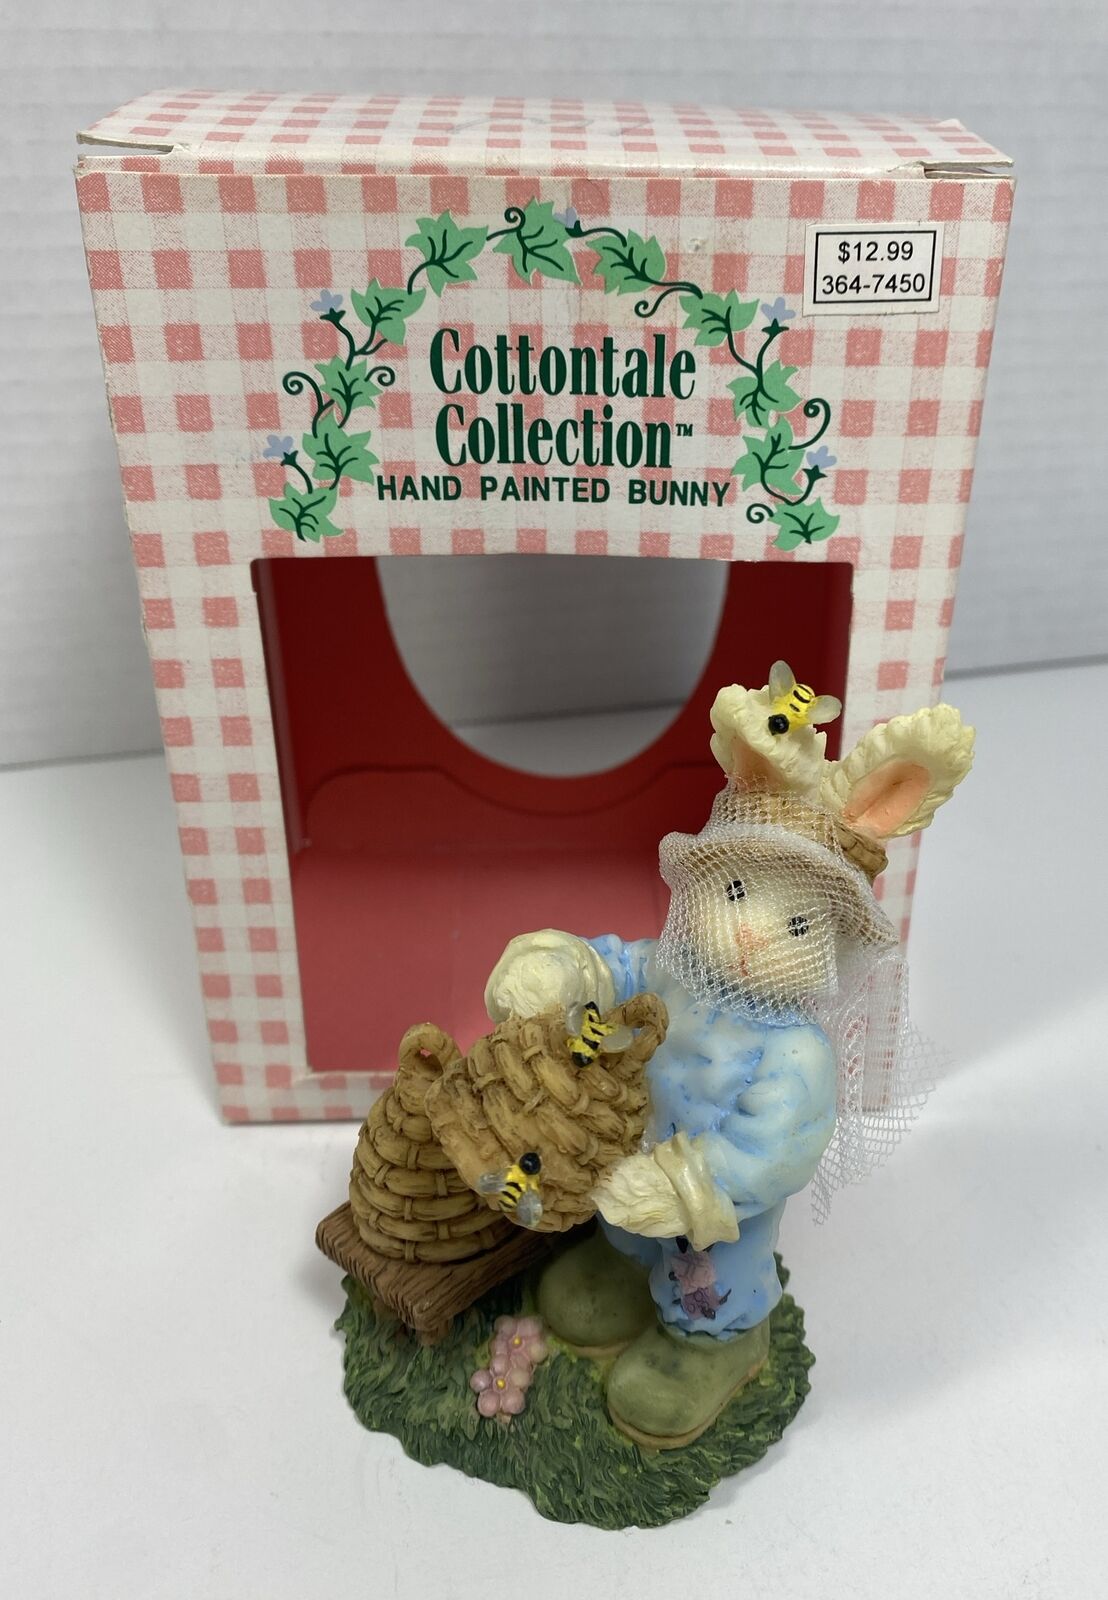 Vintage Cottontale Collection Hand Painted Easter Bunny Beekeeper Figurine w/box